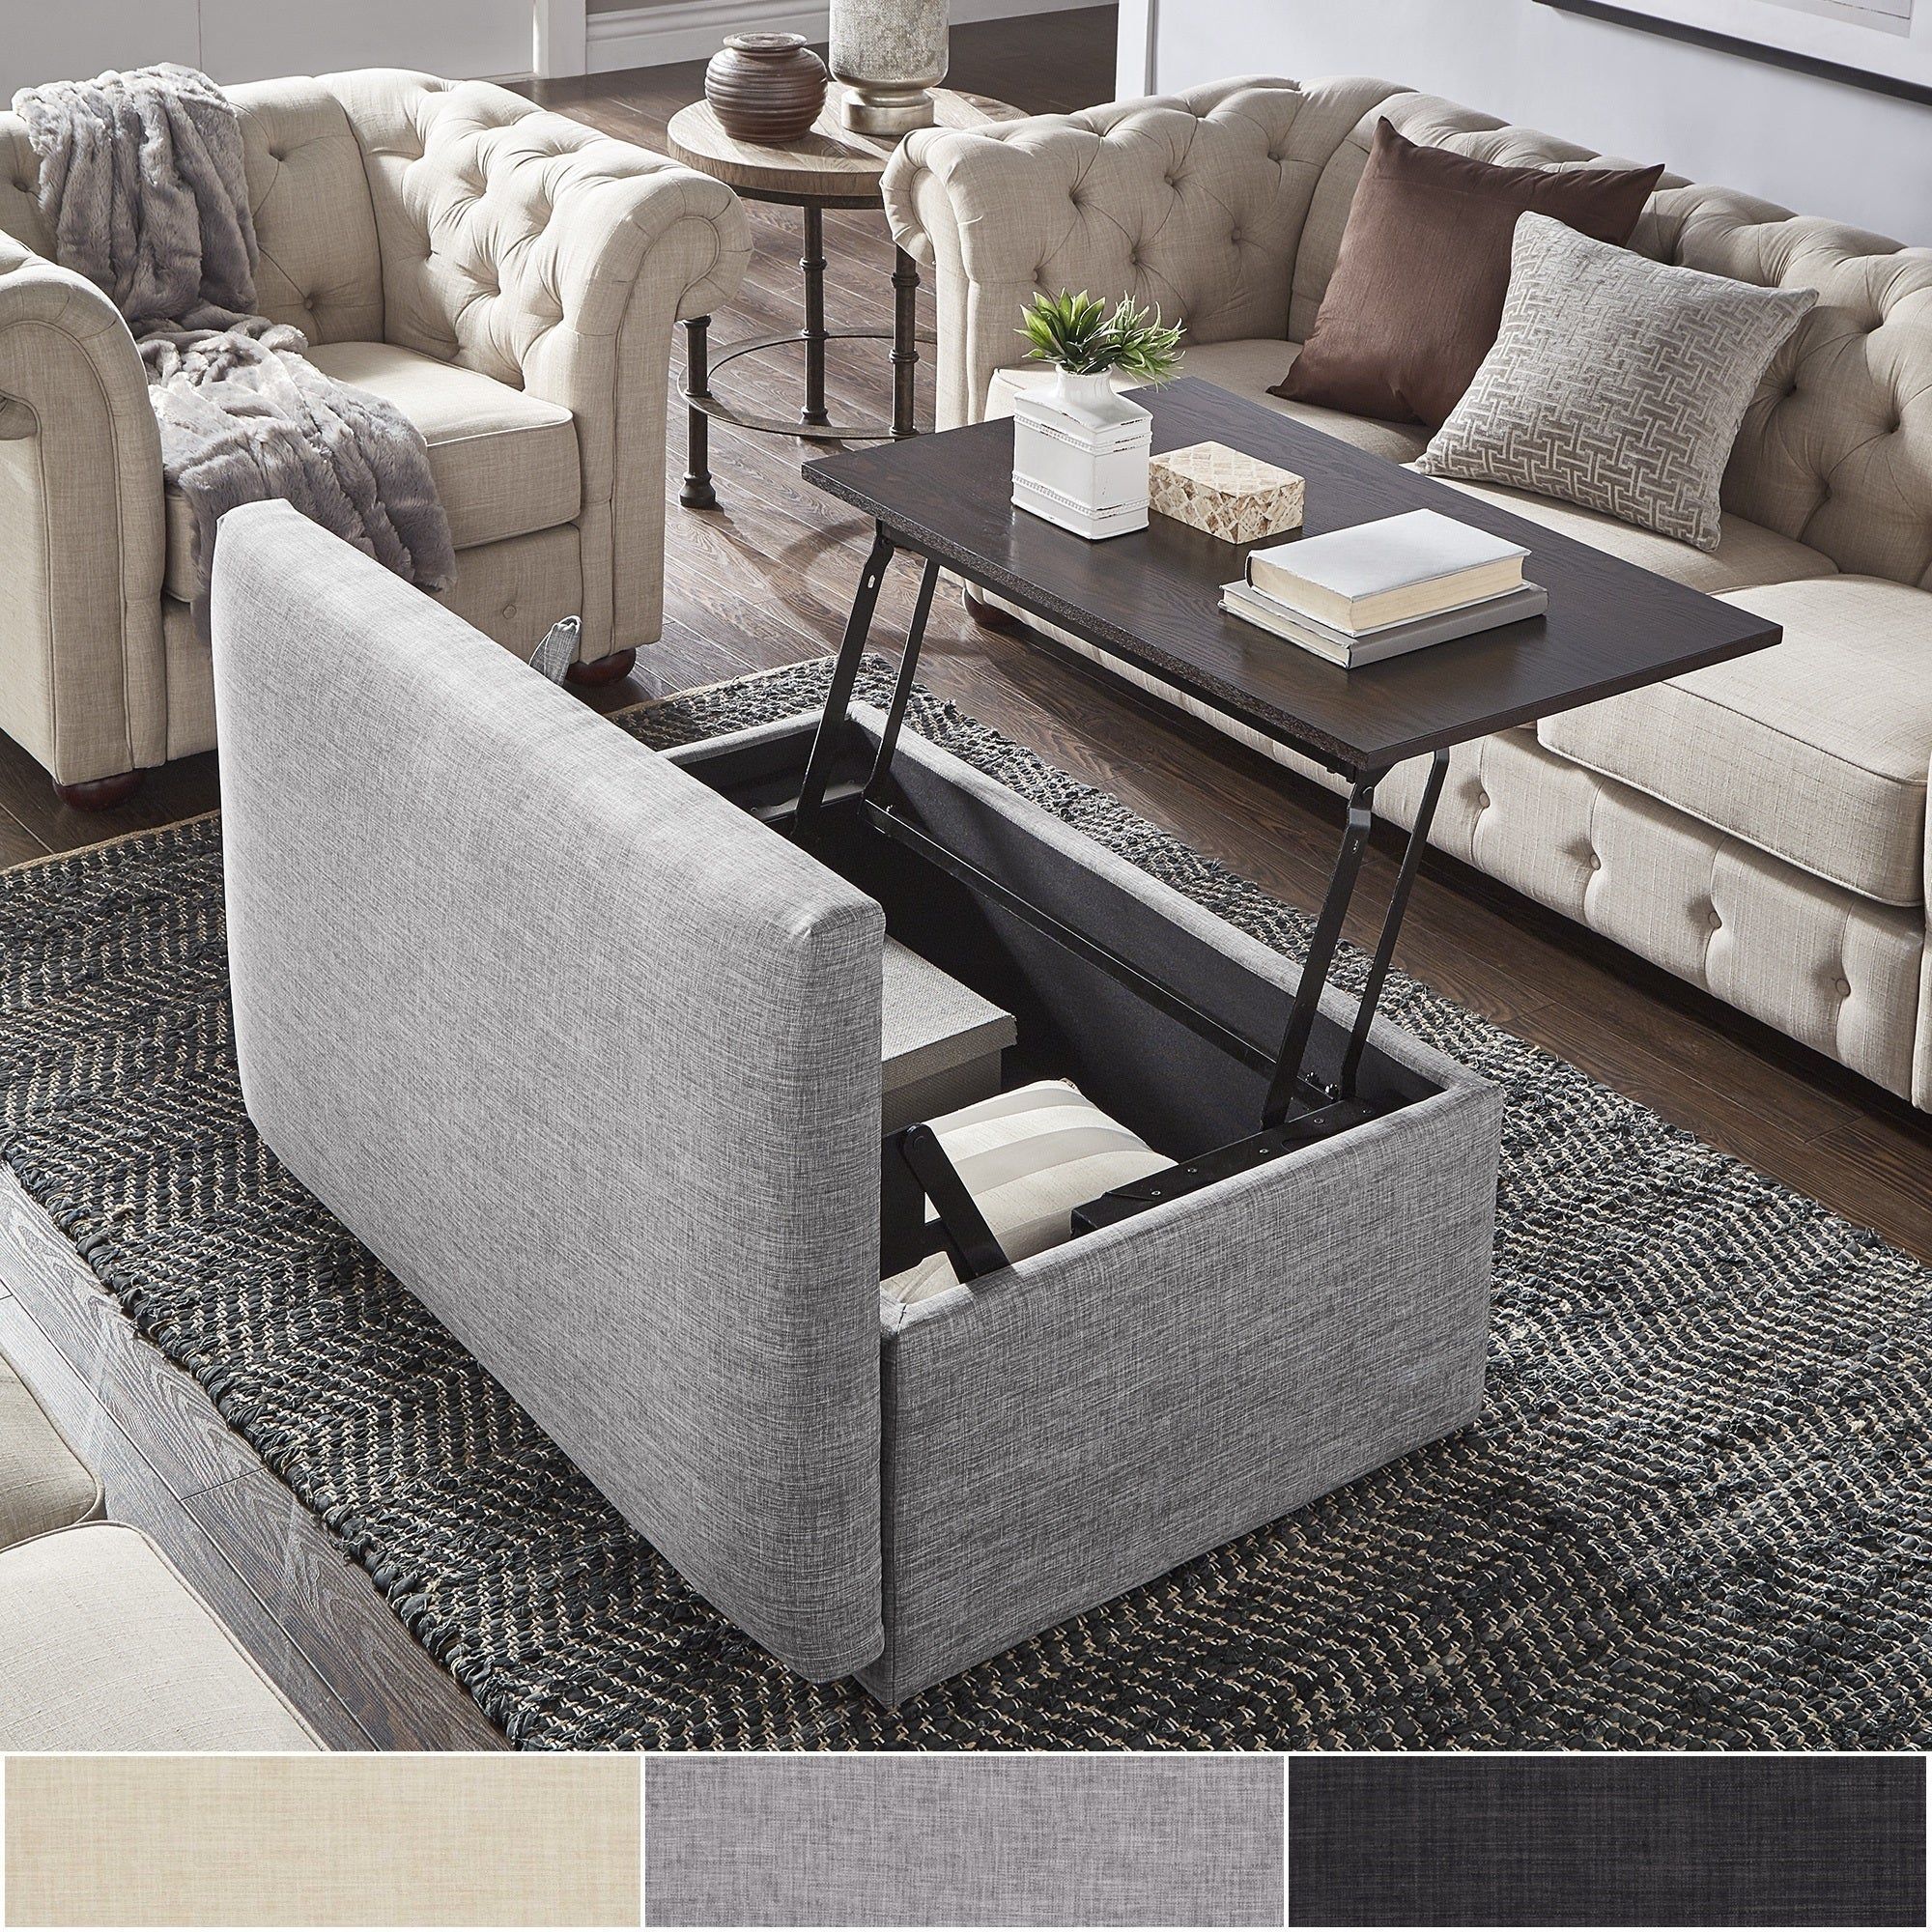 Landen Lift Top Upholstered Storage Ottoman Coffee Table by iNSPIRE Q Artisan - https://pickndecor.com/interior